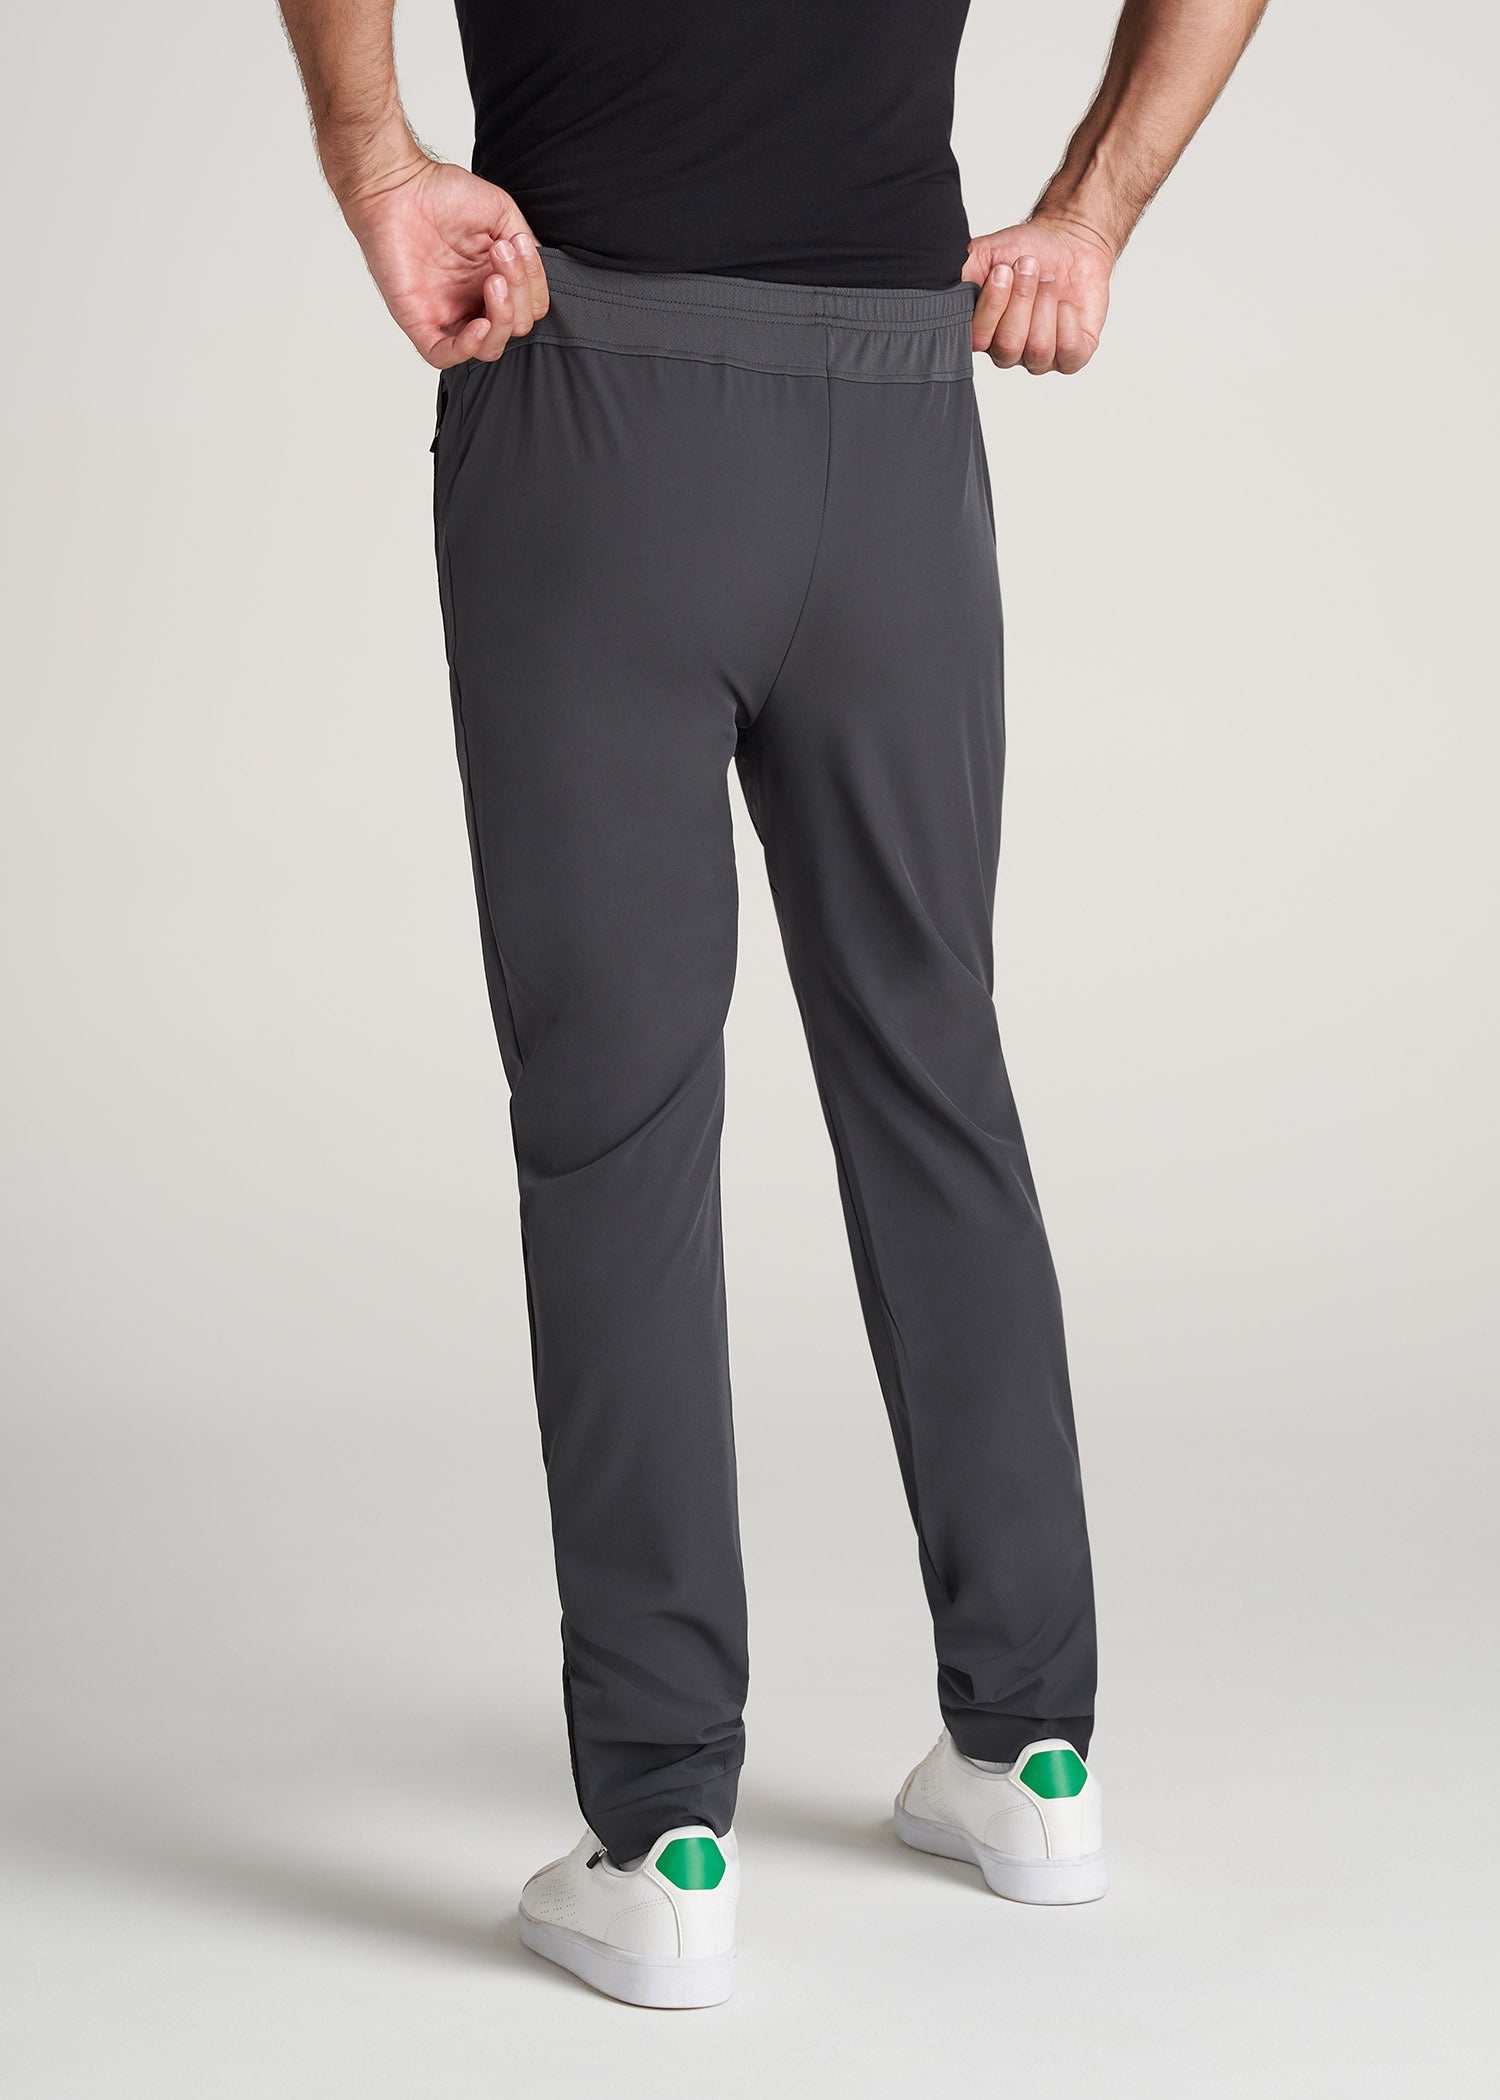 American-Tall-Men-TaperedFit-LightWeight-AthleticPant-Charcoal-back